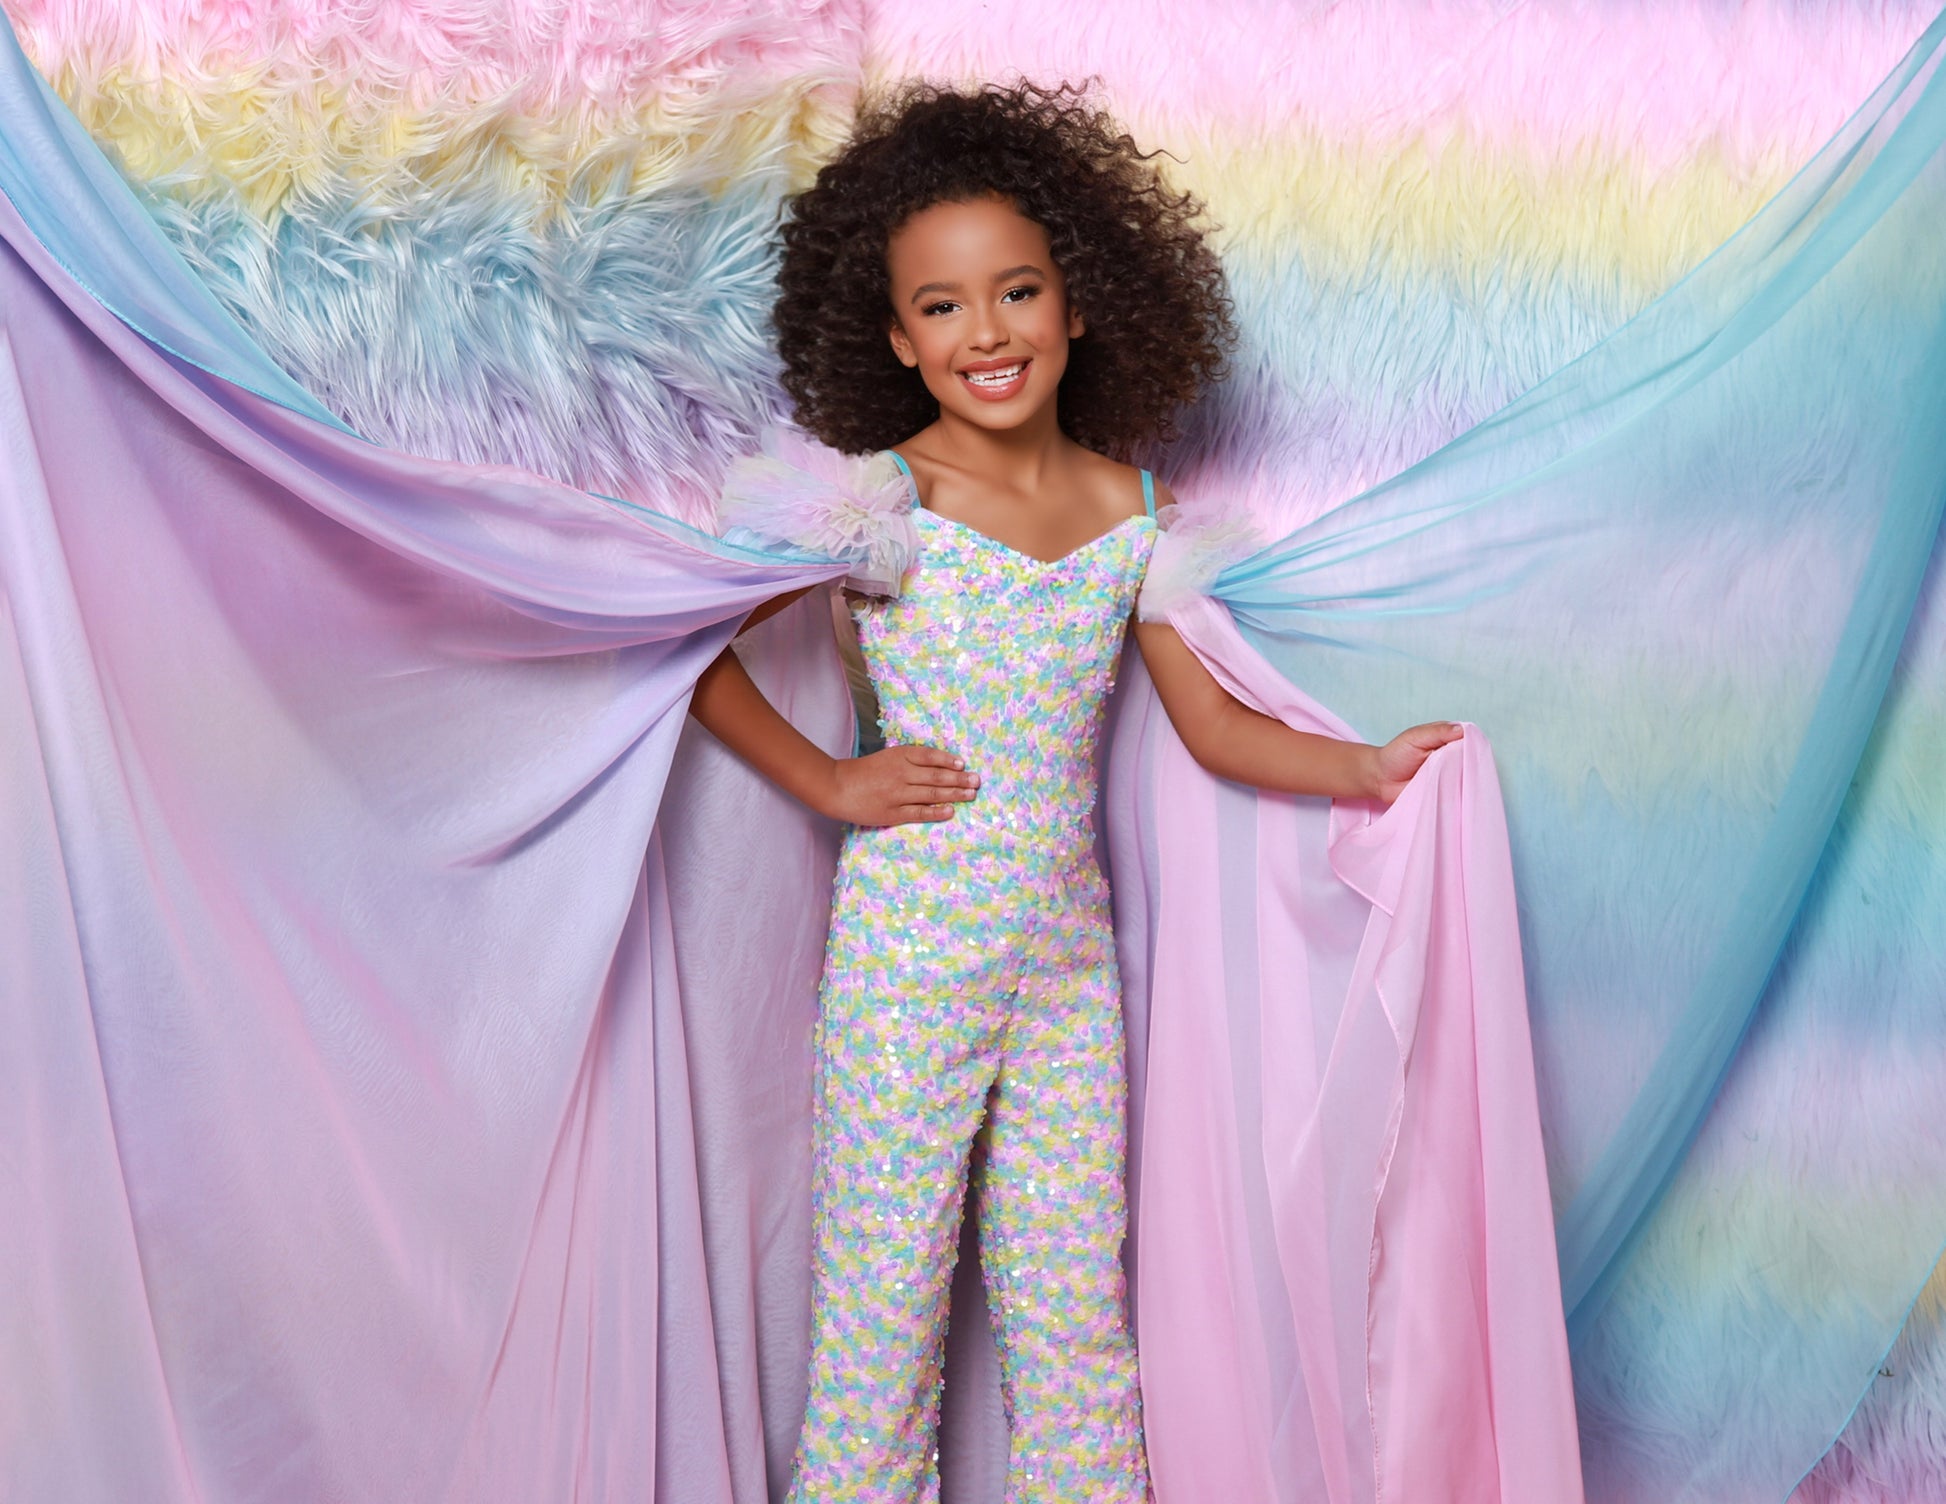 The Sugar Kayne C341 Jumpsuit is the perfect choice for your little princess. This fashionable, comfortable outfit features an all-over sequin design, ruffle sleeves and matching cape for a unique look. Perfect for clinics, pageants and any special occasion. 